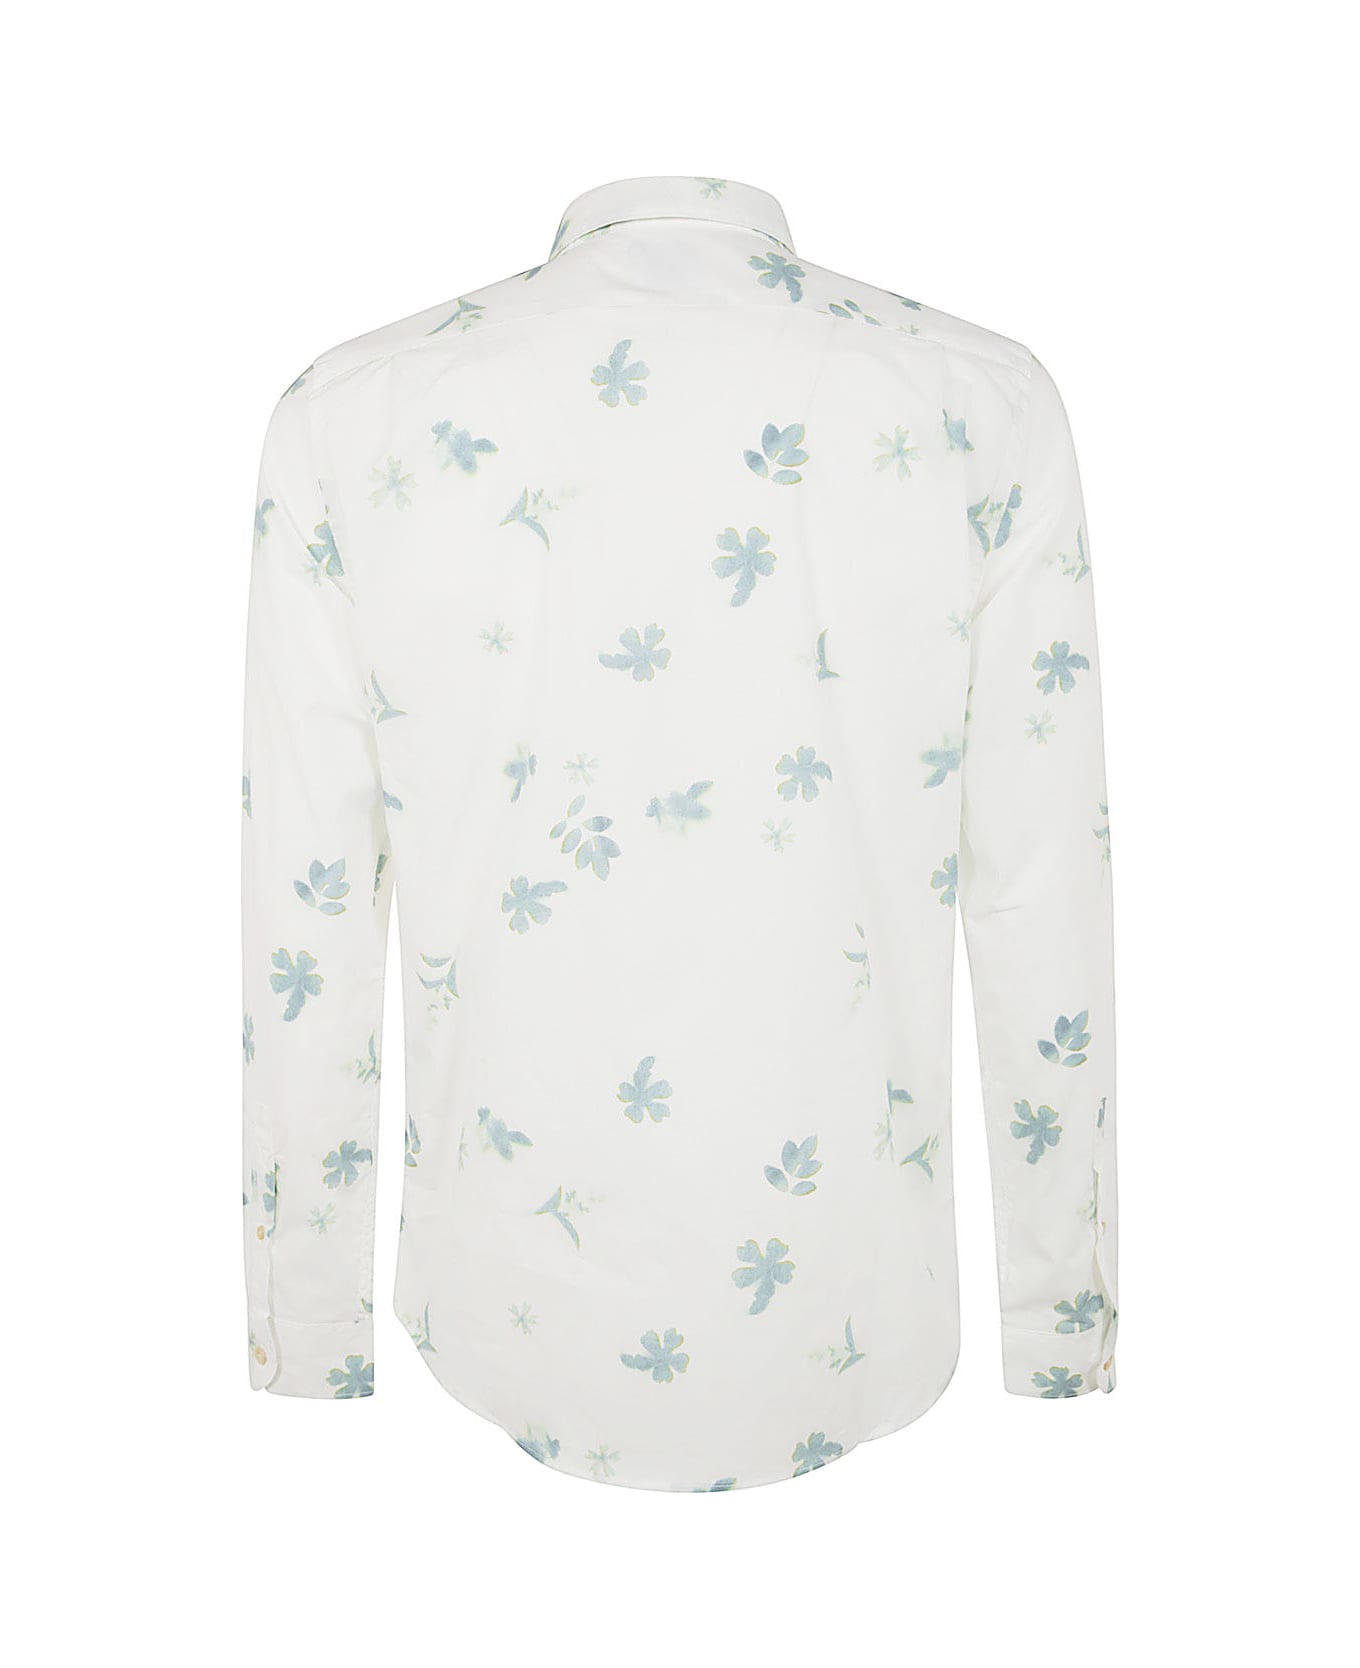 PS by Paul Smith Mens Ls Tailored Fit Shirt - Whites シャツ